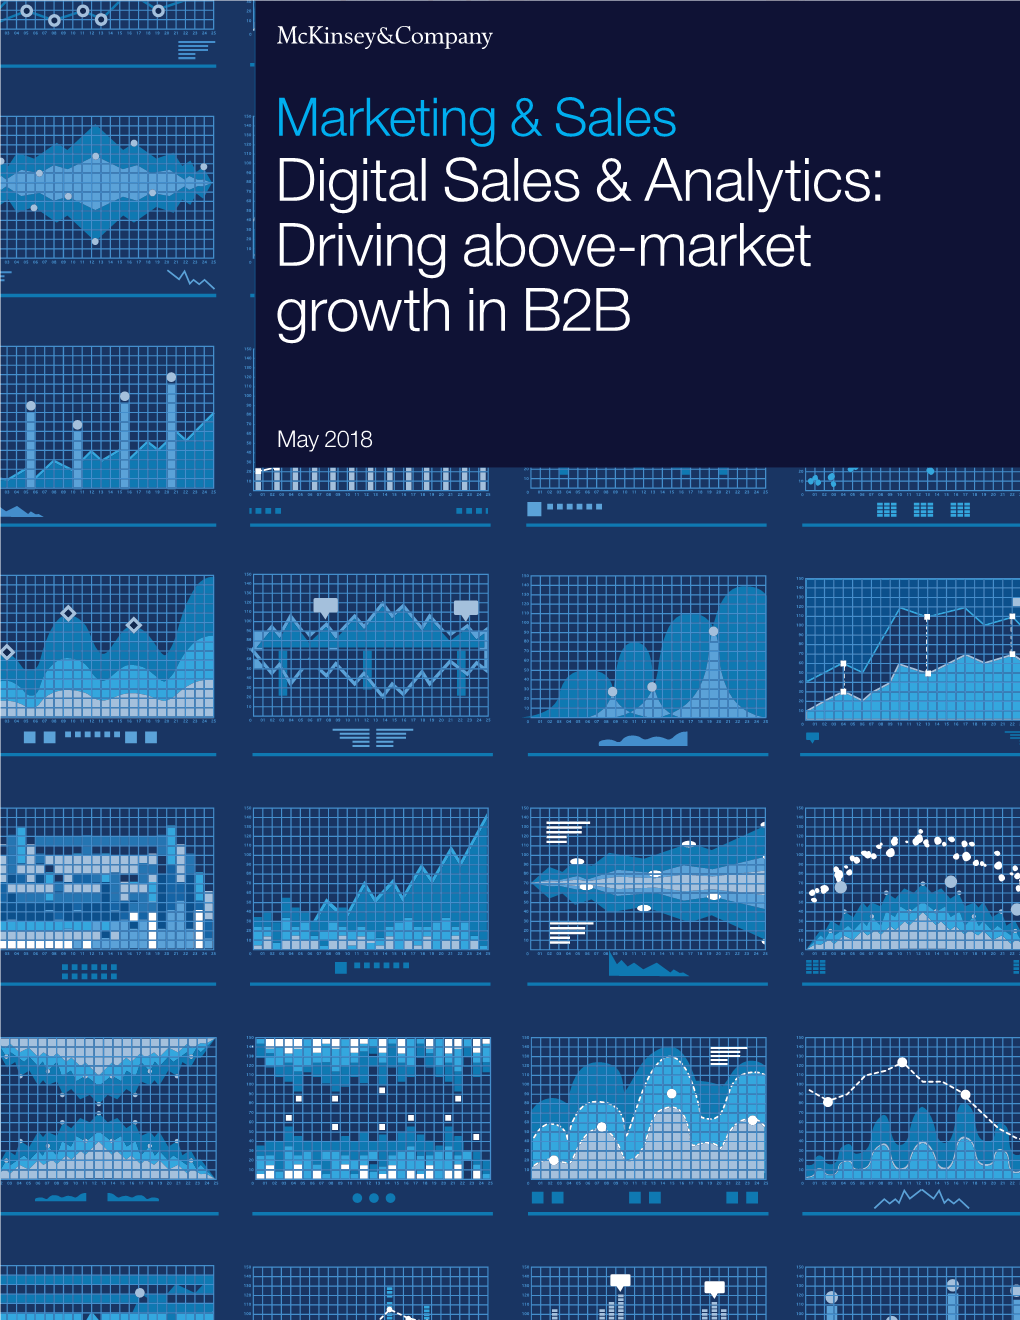 Driving Above-Market Growth in B2B